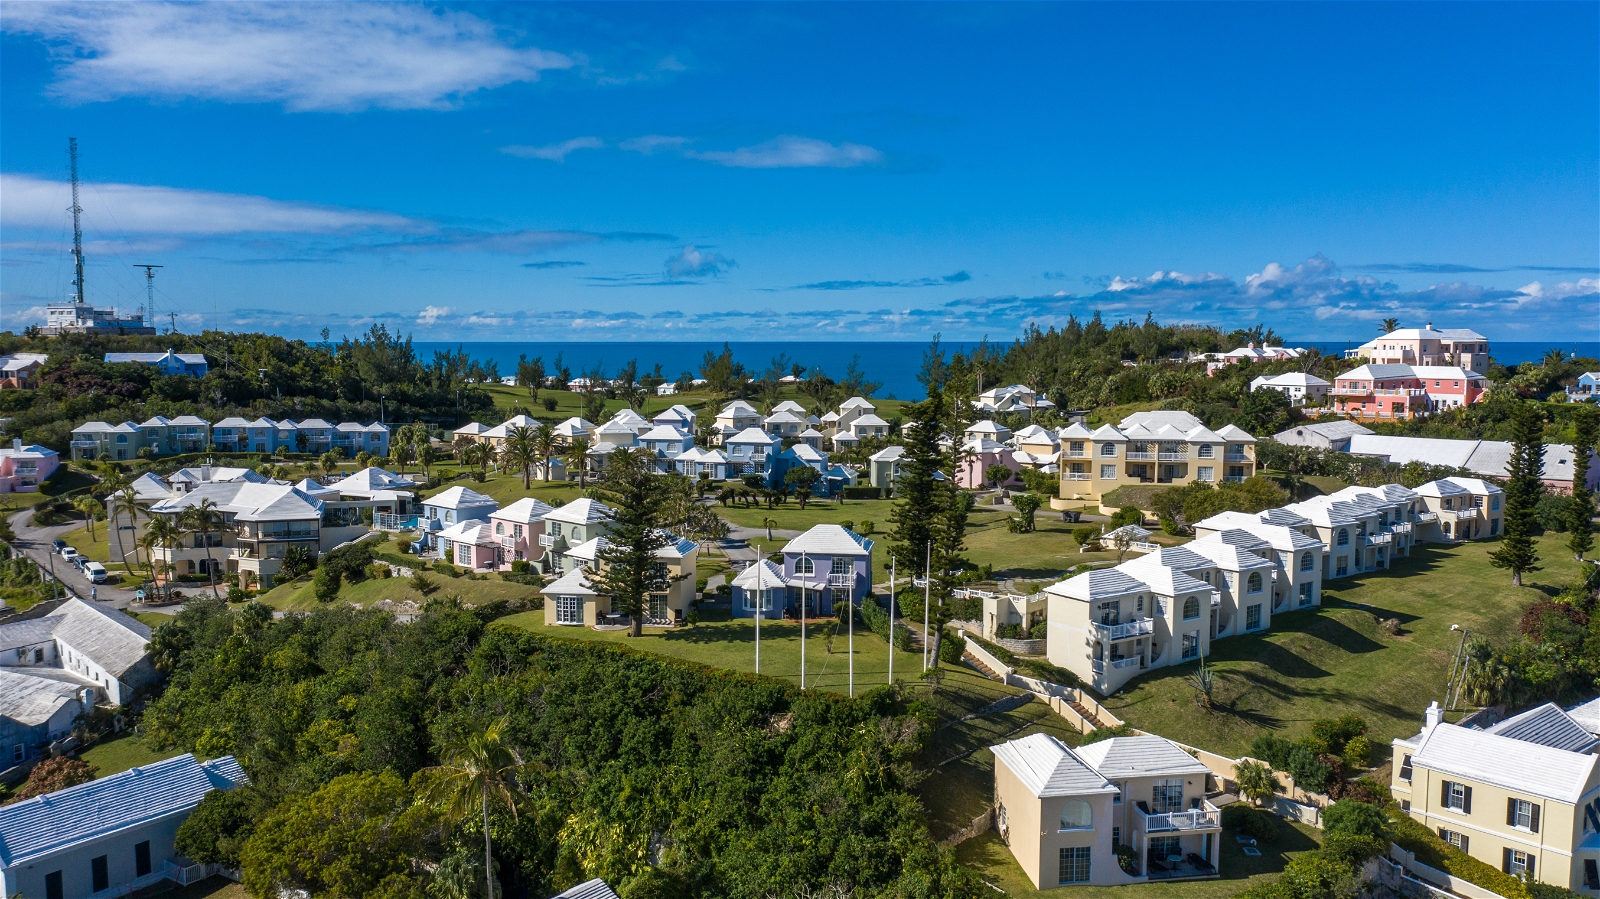 Golf Vacation Package - Beautiful Warm Bermuda Winter Special from $357 per day!